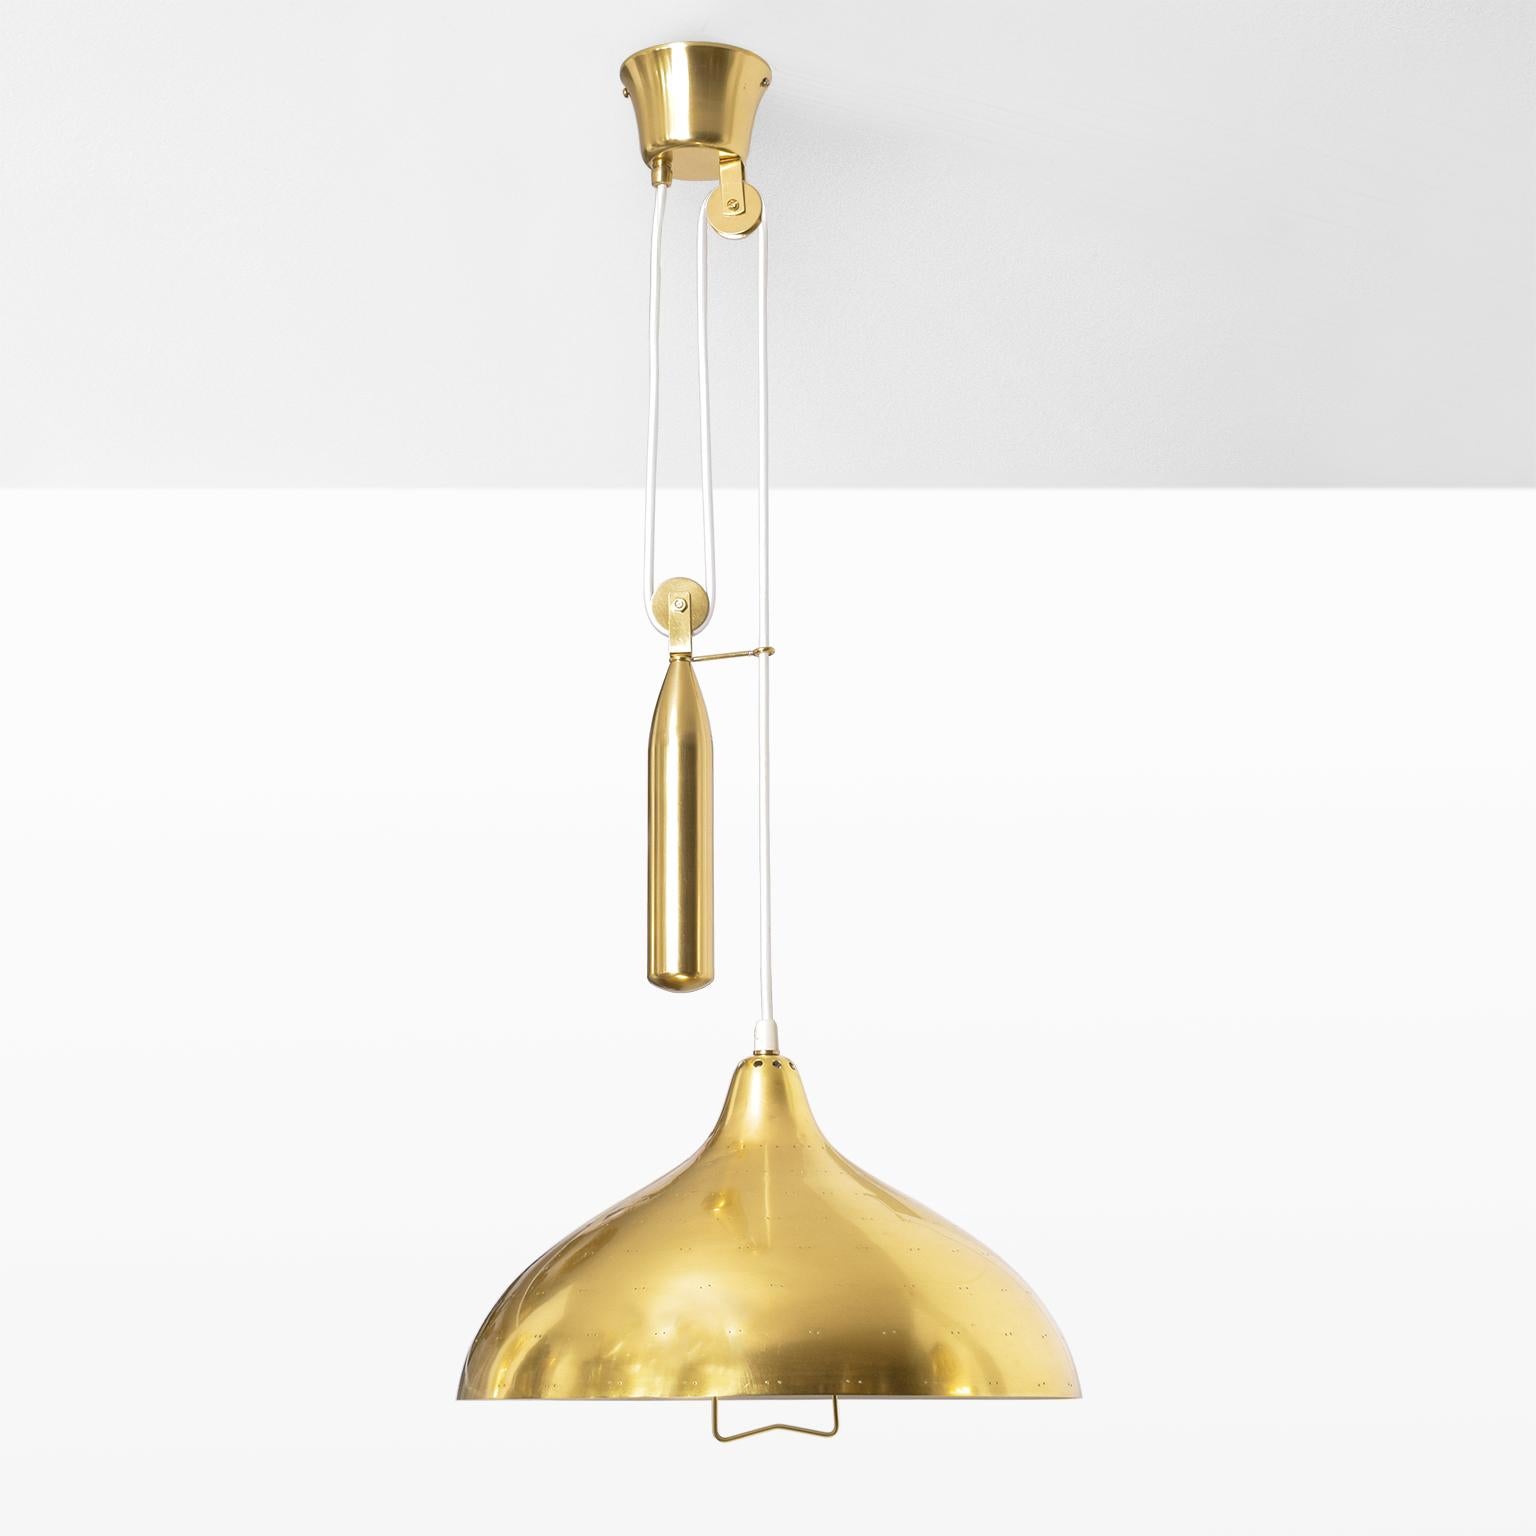 An adjustable pendant fixture with a perforated shade and counterweight mechanism. Newly restored, polished and lacquered shade, inner shade newly painted, newly rewired for use in the USA with a single Edison base socket. Made by Itsu, Finland